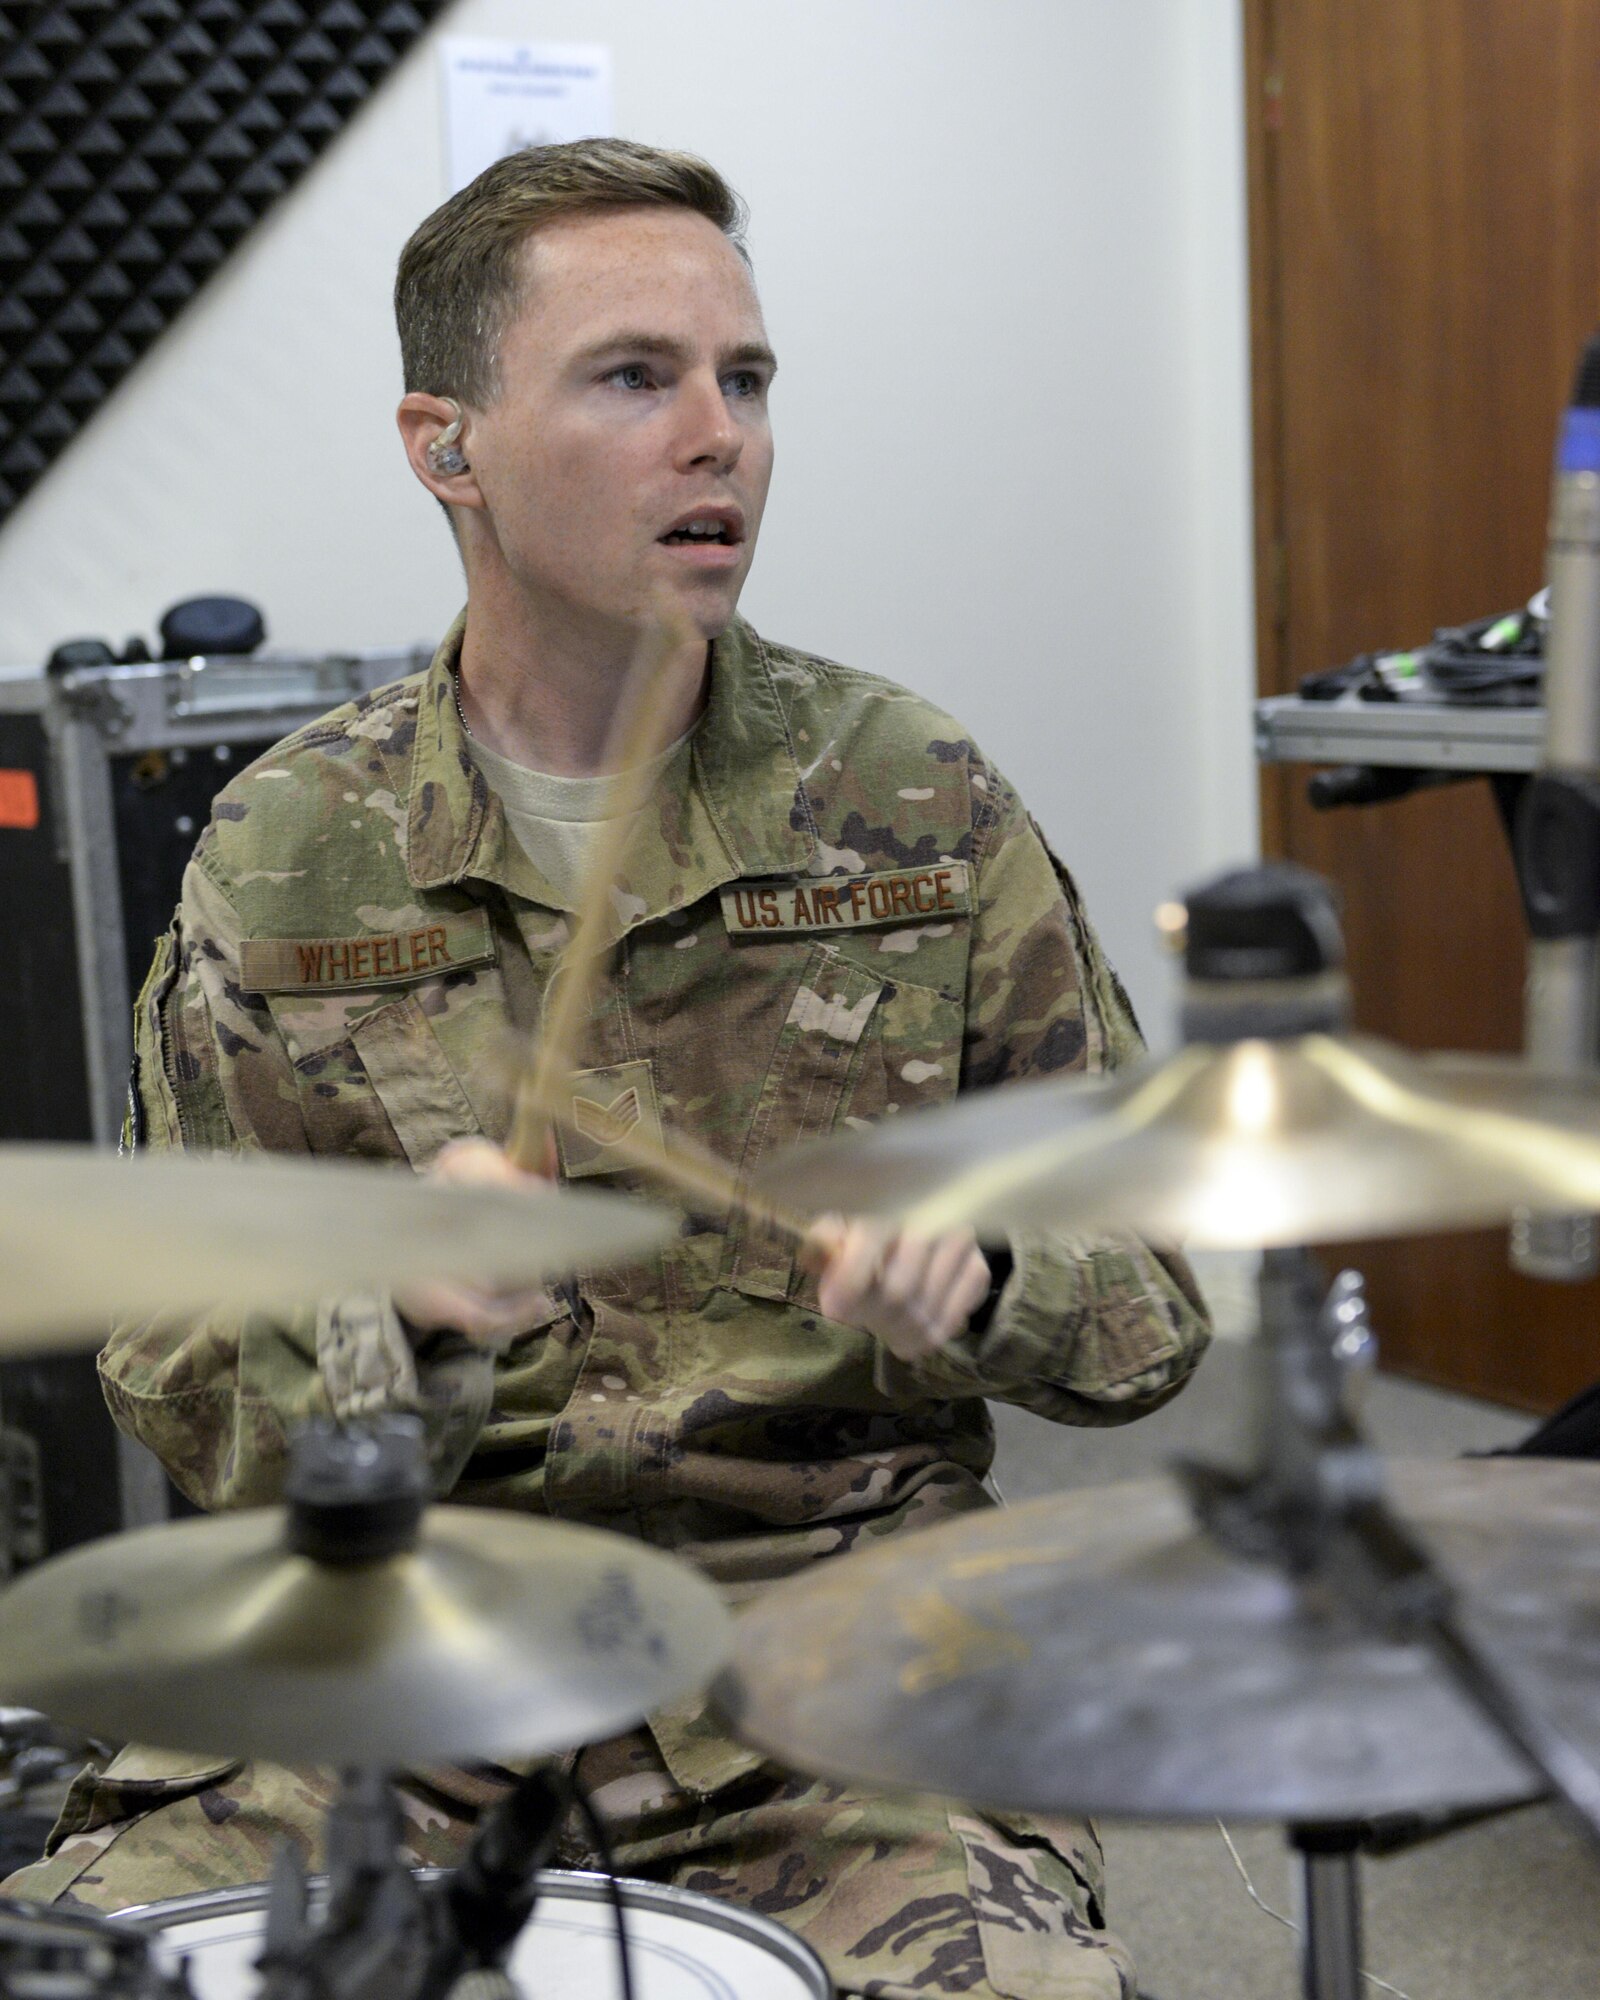 U.S. Air Force Staff Sgt. Mark Wheeler, drummer assigned to the Air Force Central Command Band, Touch-n-Go, plays drums during a recording session as the band recorded their punk rock rendition of the Air Force Song at Al Udeid, Air Force Base, Qatar, Sept. 21, 2017.